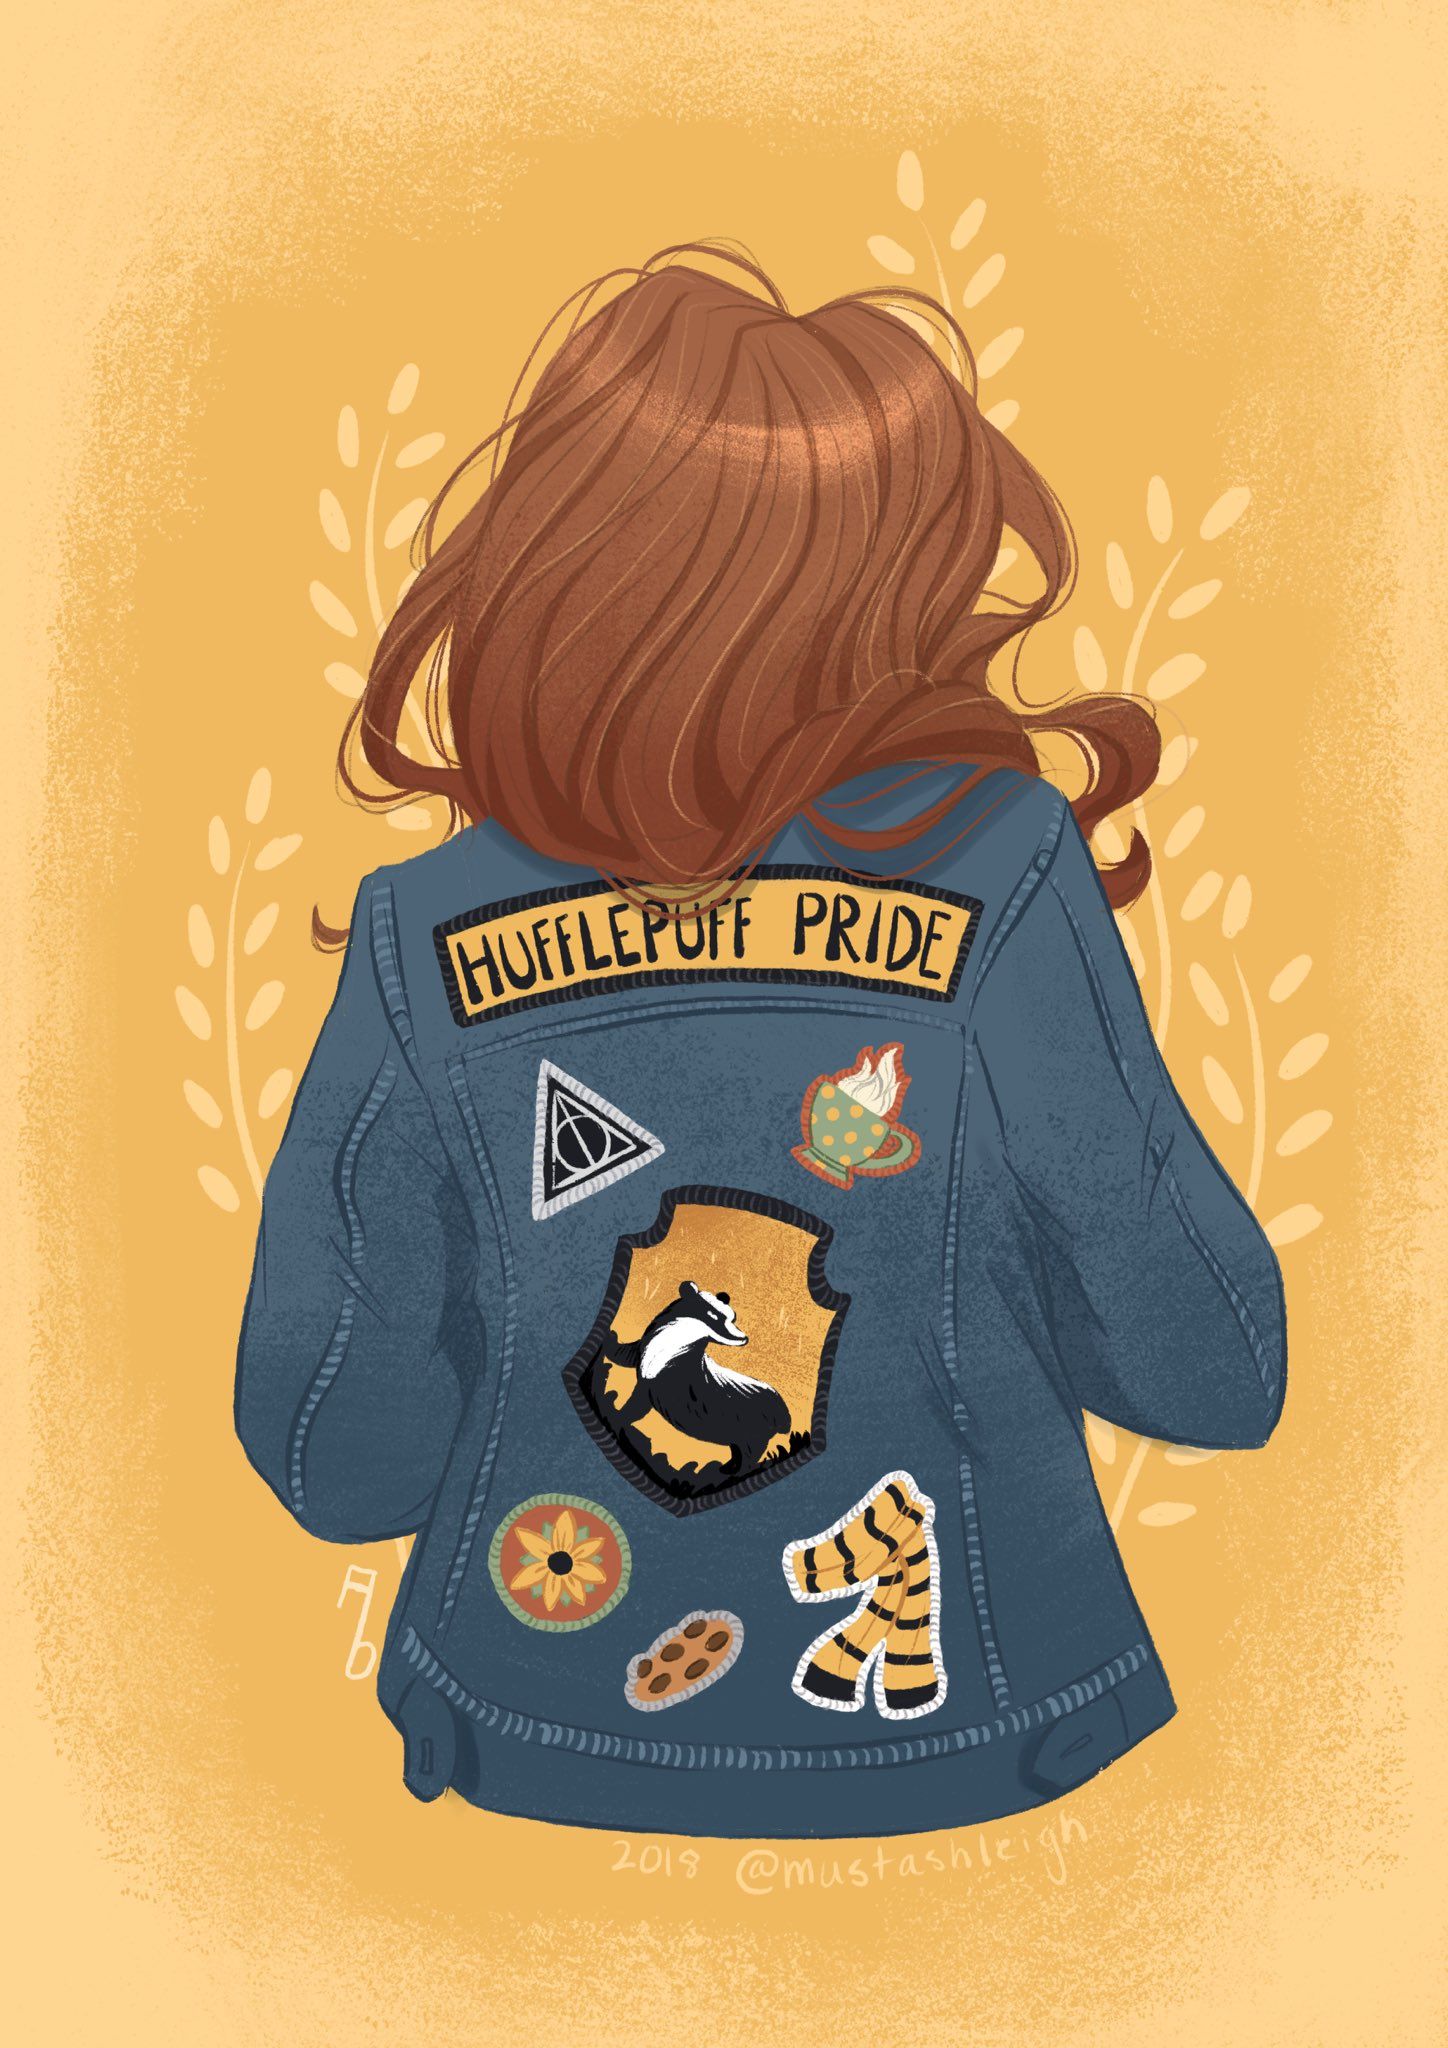 A digital illustration of a girl wearing a denim jacket with Hufflepuff pride patches on the back. - Hufflepuff